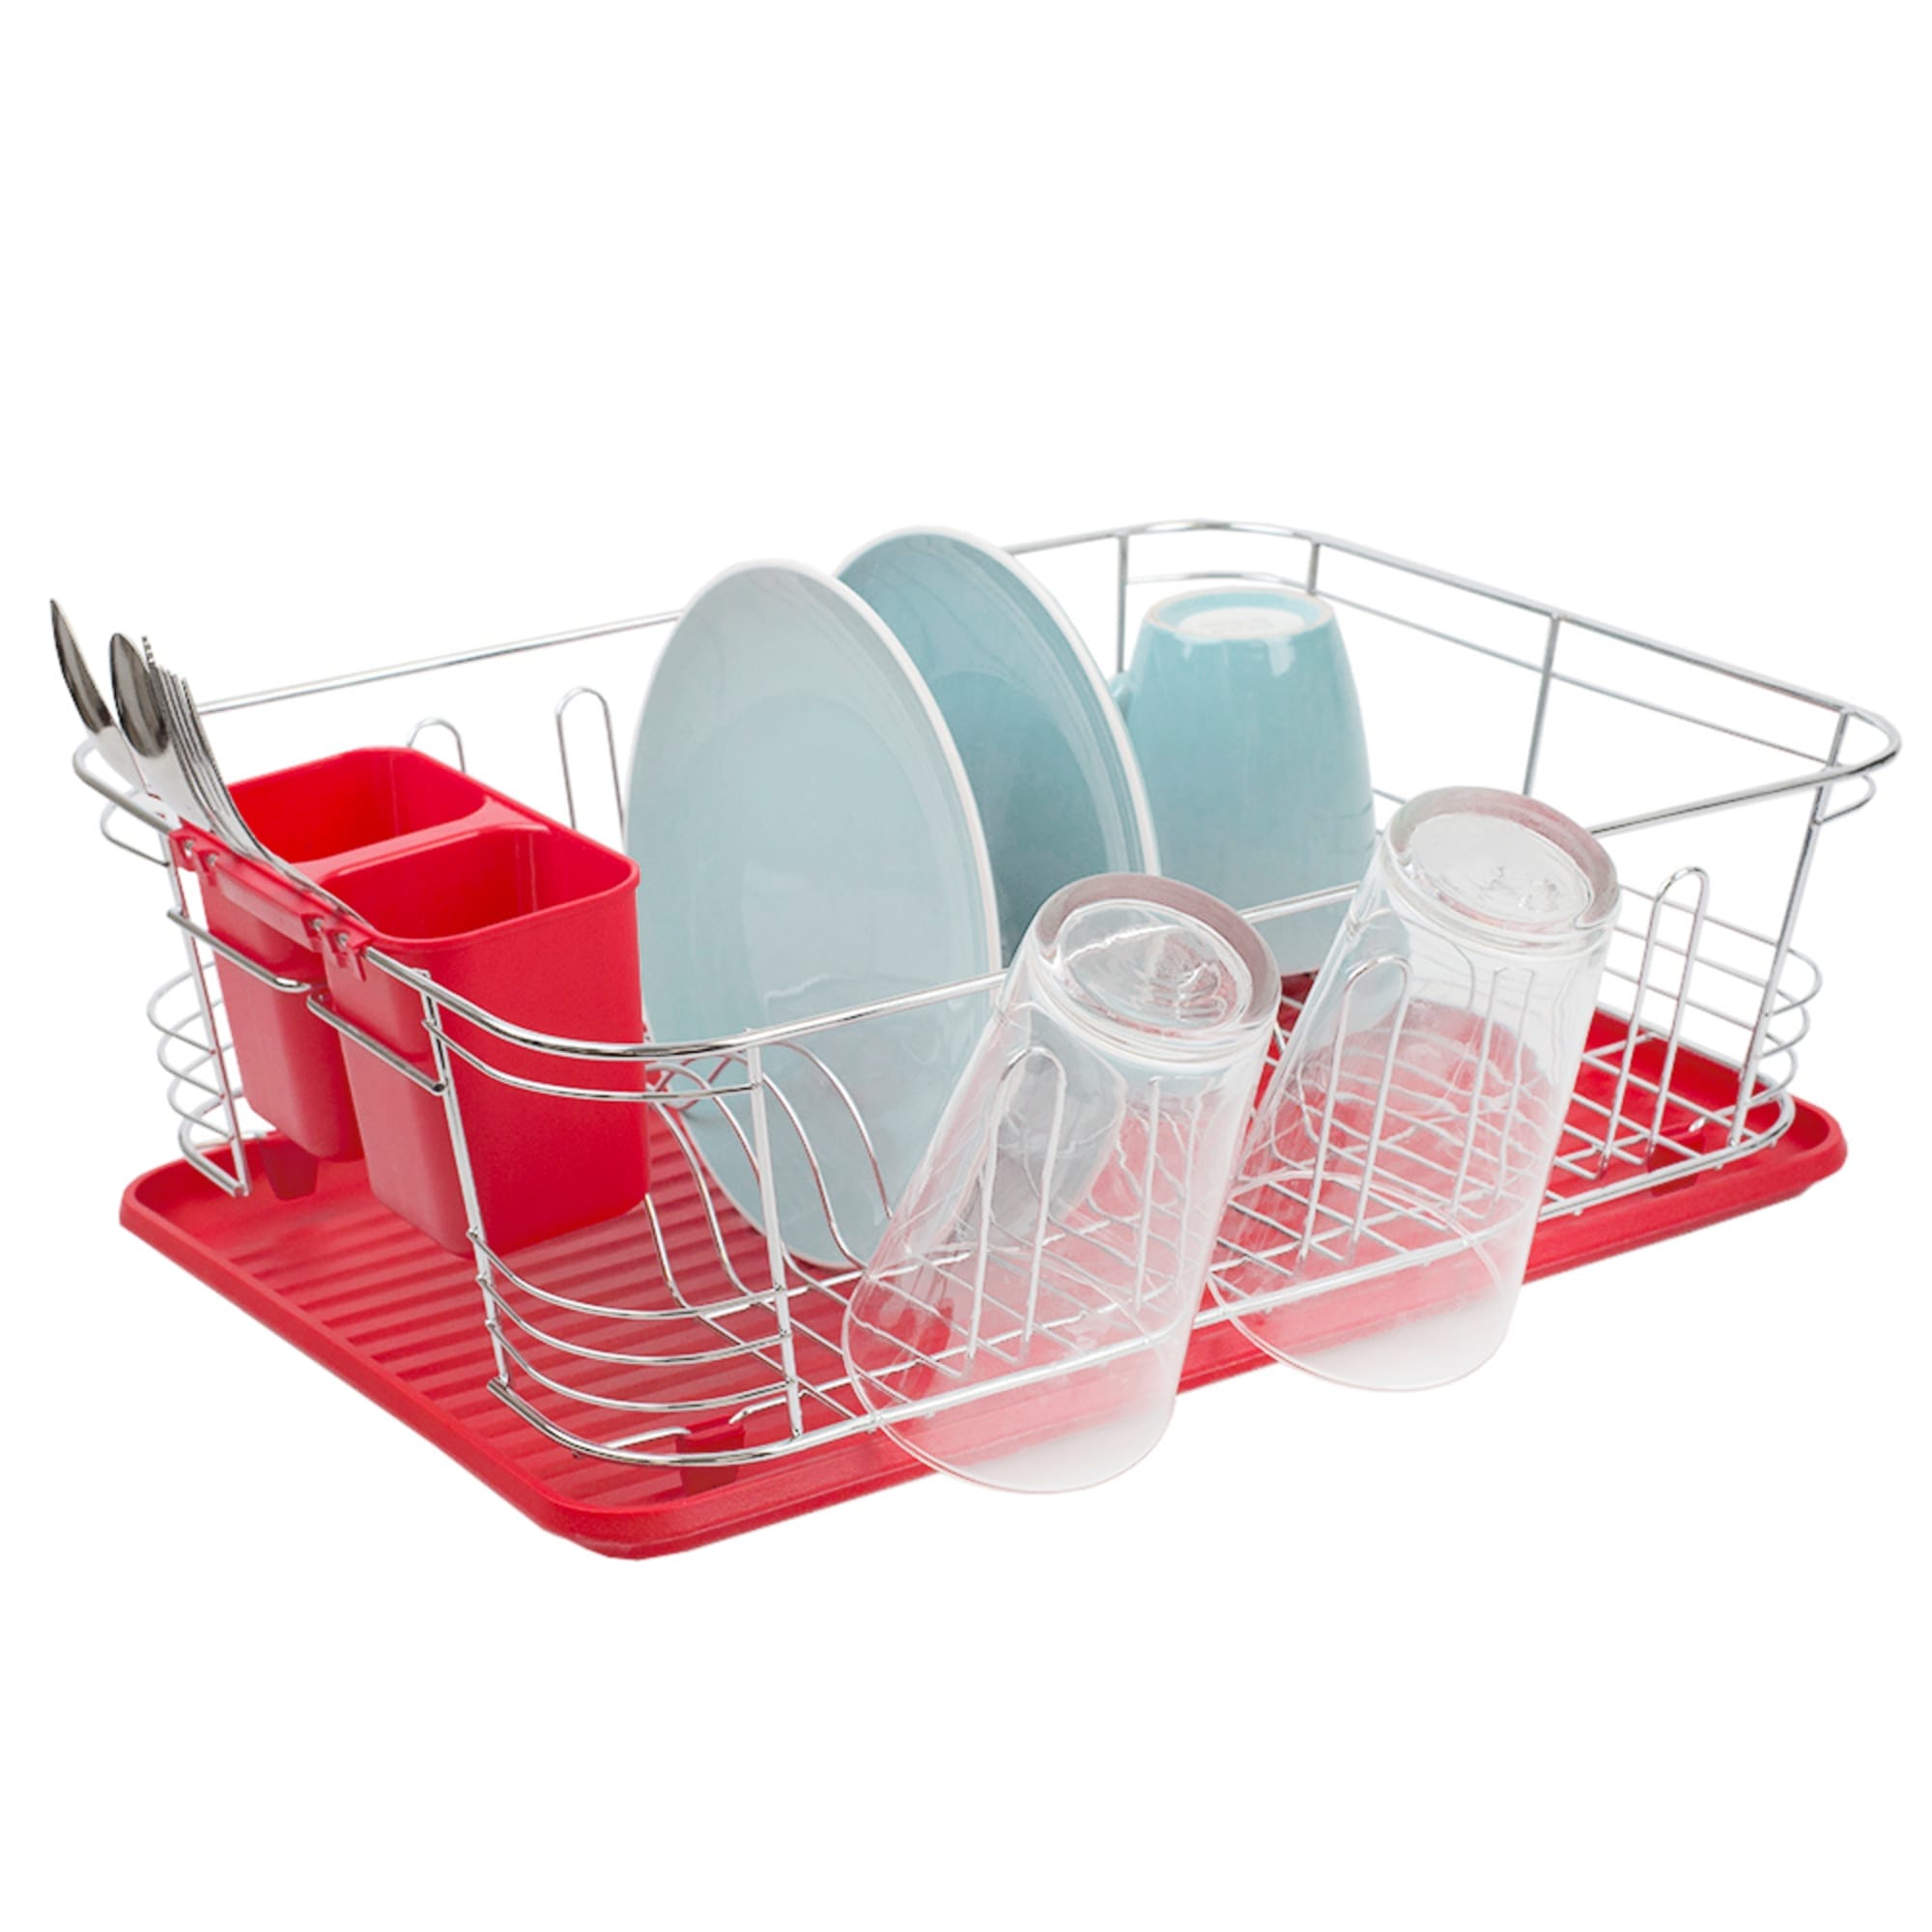 Home Basics 3 Piece  Chrome Plated Steel and Plastic Dish Rack, Red $15.00 EACH, CASE PACK OF 6